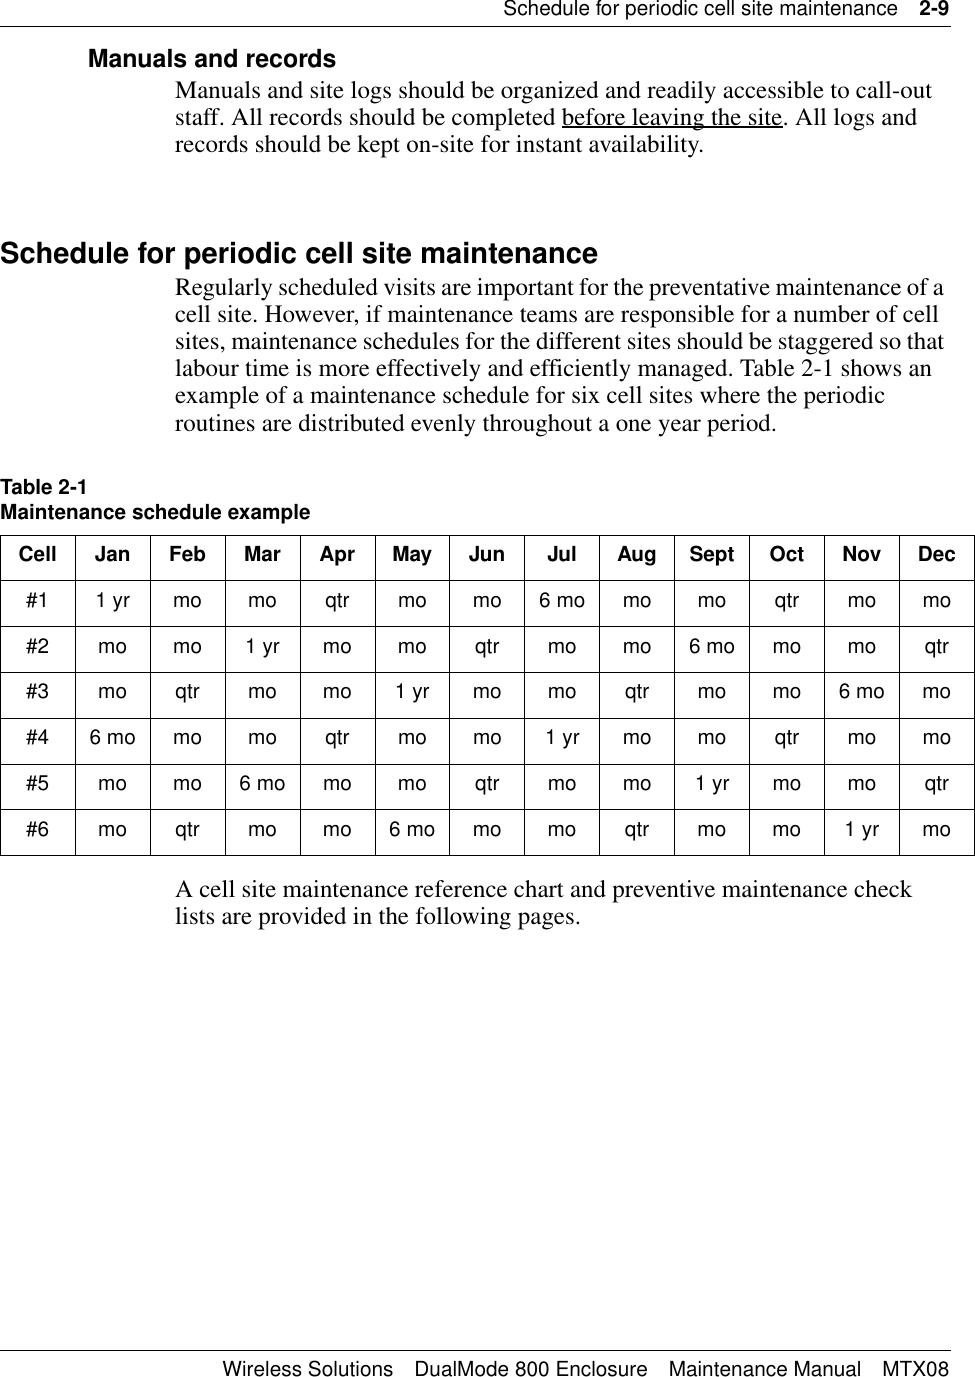 Schedule for periodic cell site maintenance 2-9Wireless Solutions DualMode 800 Enclosure Maintenance Manual MTX08Manuals and recordsManuals and site logs should be organized and readily accessible to call-out staff. All records should be completed before leaving the site. All logs and records should be kept on-site for instant availability.Schedule for periodic cell site maintenance Regularly scheduled visits are important for the preventative maintenance of a cell site. However, if maintenance teams are responsible for a number of cell sites, maintenance schedules for the different sites should be staggered so that labour time is more effectively and efficiently managed. Table 2-1 shows an example of a maintenance schedule for six cell sites where the periodic routines are distributed evenly throughout a one year period.A cell site maintenance reference chart and preventive maintenance check lists are provided in the following pages.Table 2-1Maintenance schedule exampleCell Jan Feb Mar Apr May Jun Jul Aug Sept Oct Nov Dec#1 1 yr mo mo qtr mo mo 6 mo mo mo qtr mo mo#2 mo mo 1 yr mo mo qtr mo mo 6 mo mo mo qtr#3 mo qtr mo mo 1 yr mo mo qtr mo mo 6 mo mo#4 6 mo mo mo qtr mo mo 1 yr mo mo qtr mo mo#5 mo mo 6 mo mo mo qtr mo mo 1 yr mo mo qtr#6 mo qtr mo mo 6 mo mo mo qtr mo mo 1 yr mo